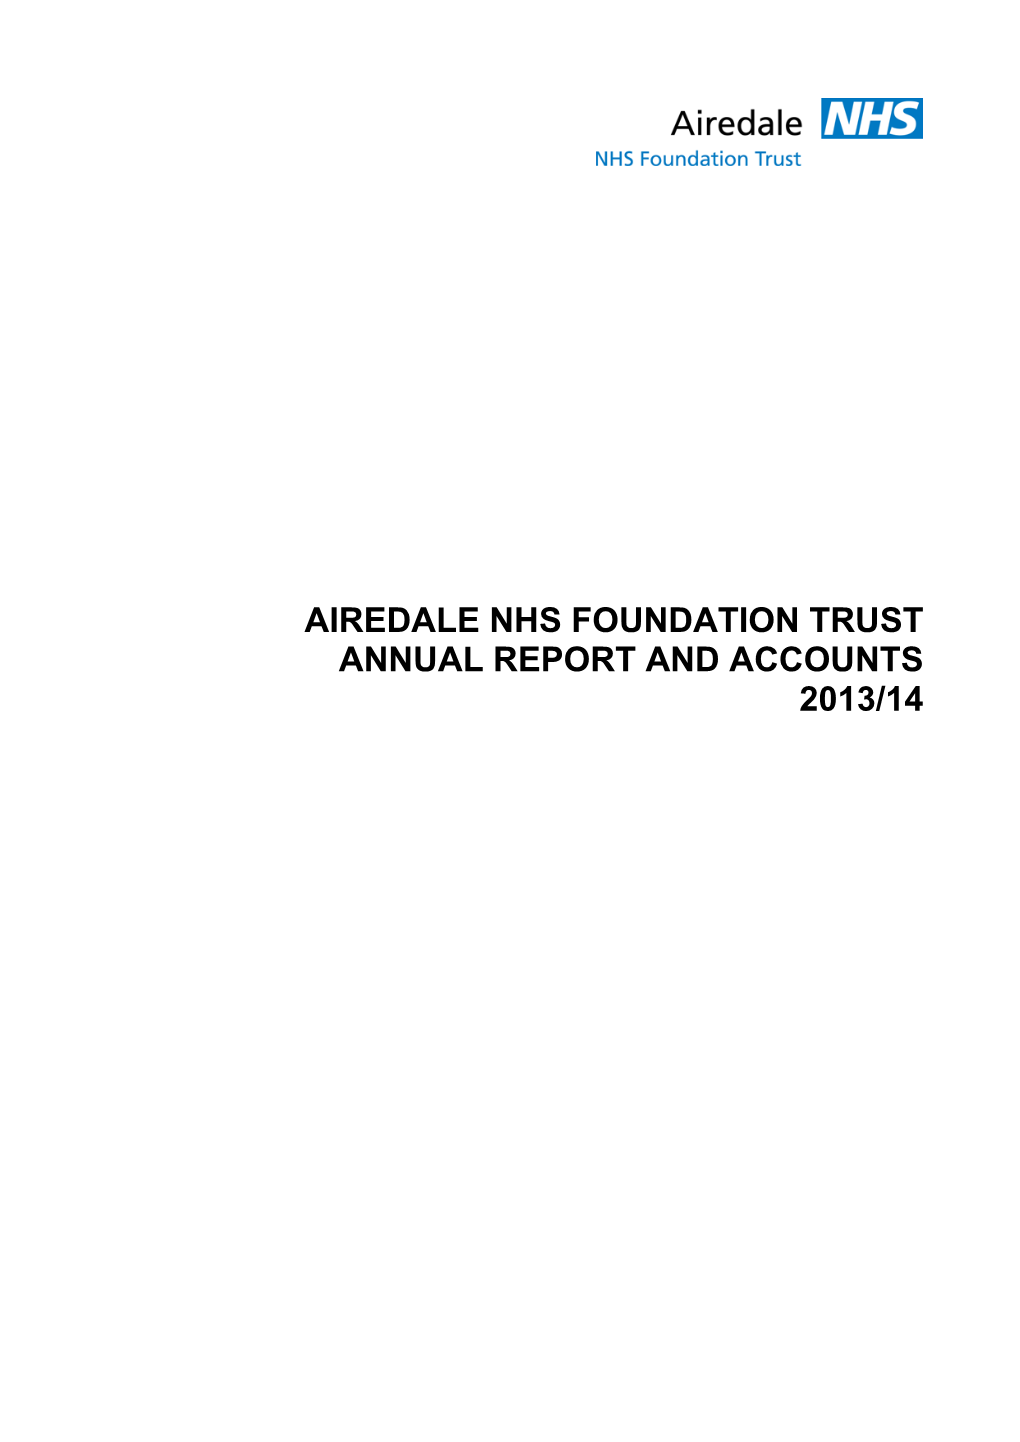 Airedale Nhs Foundation Trust Annual Report and Accounts 2013/14